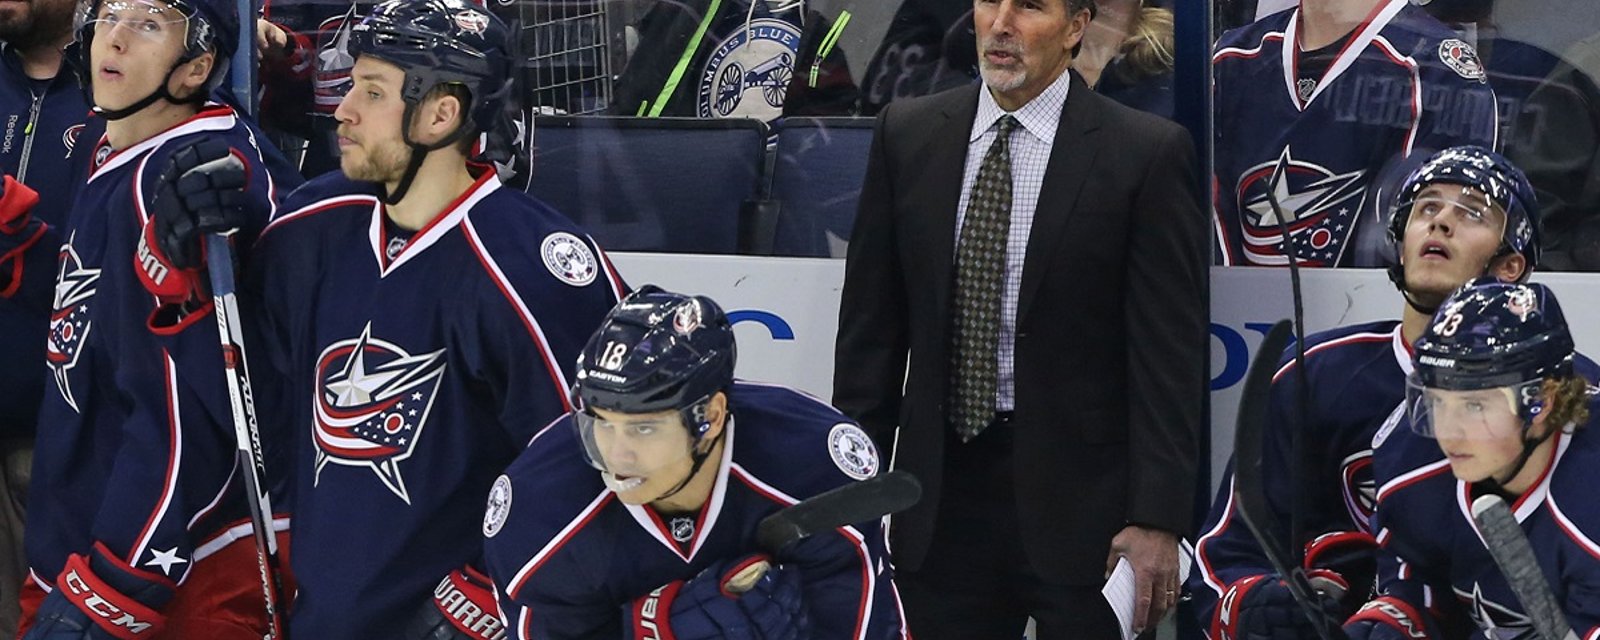 Tortorella makes another controversial move, Team USA gets shut out.